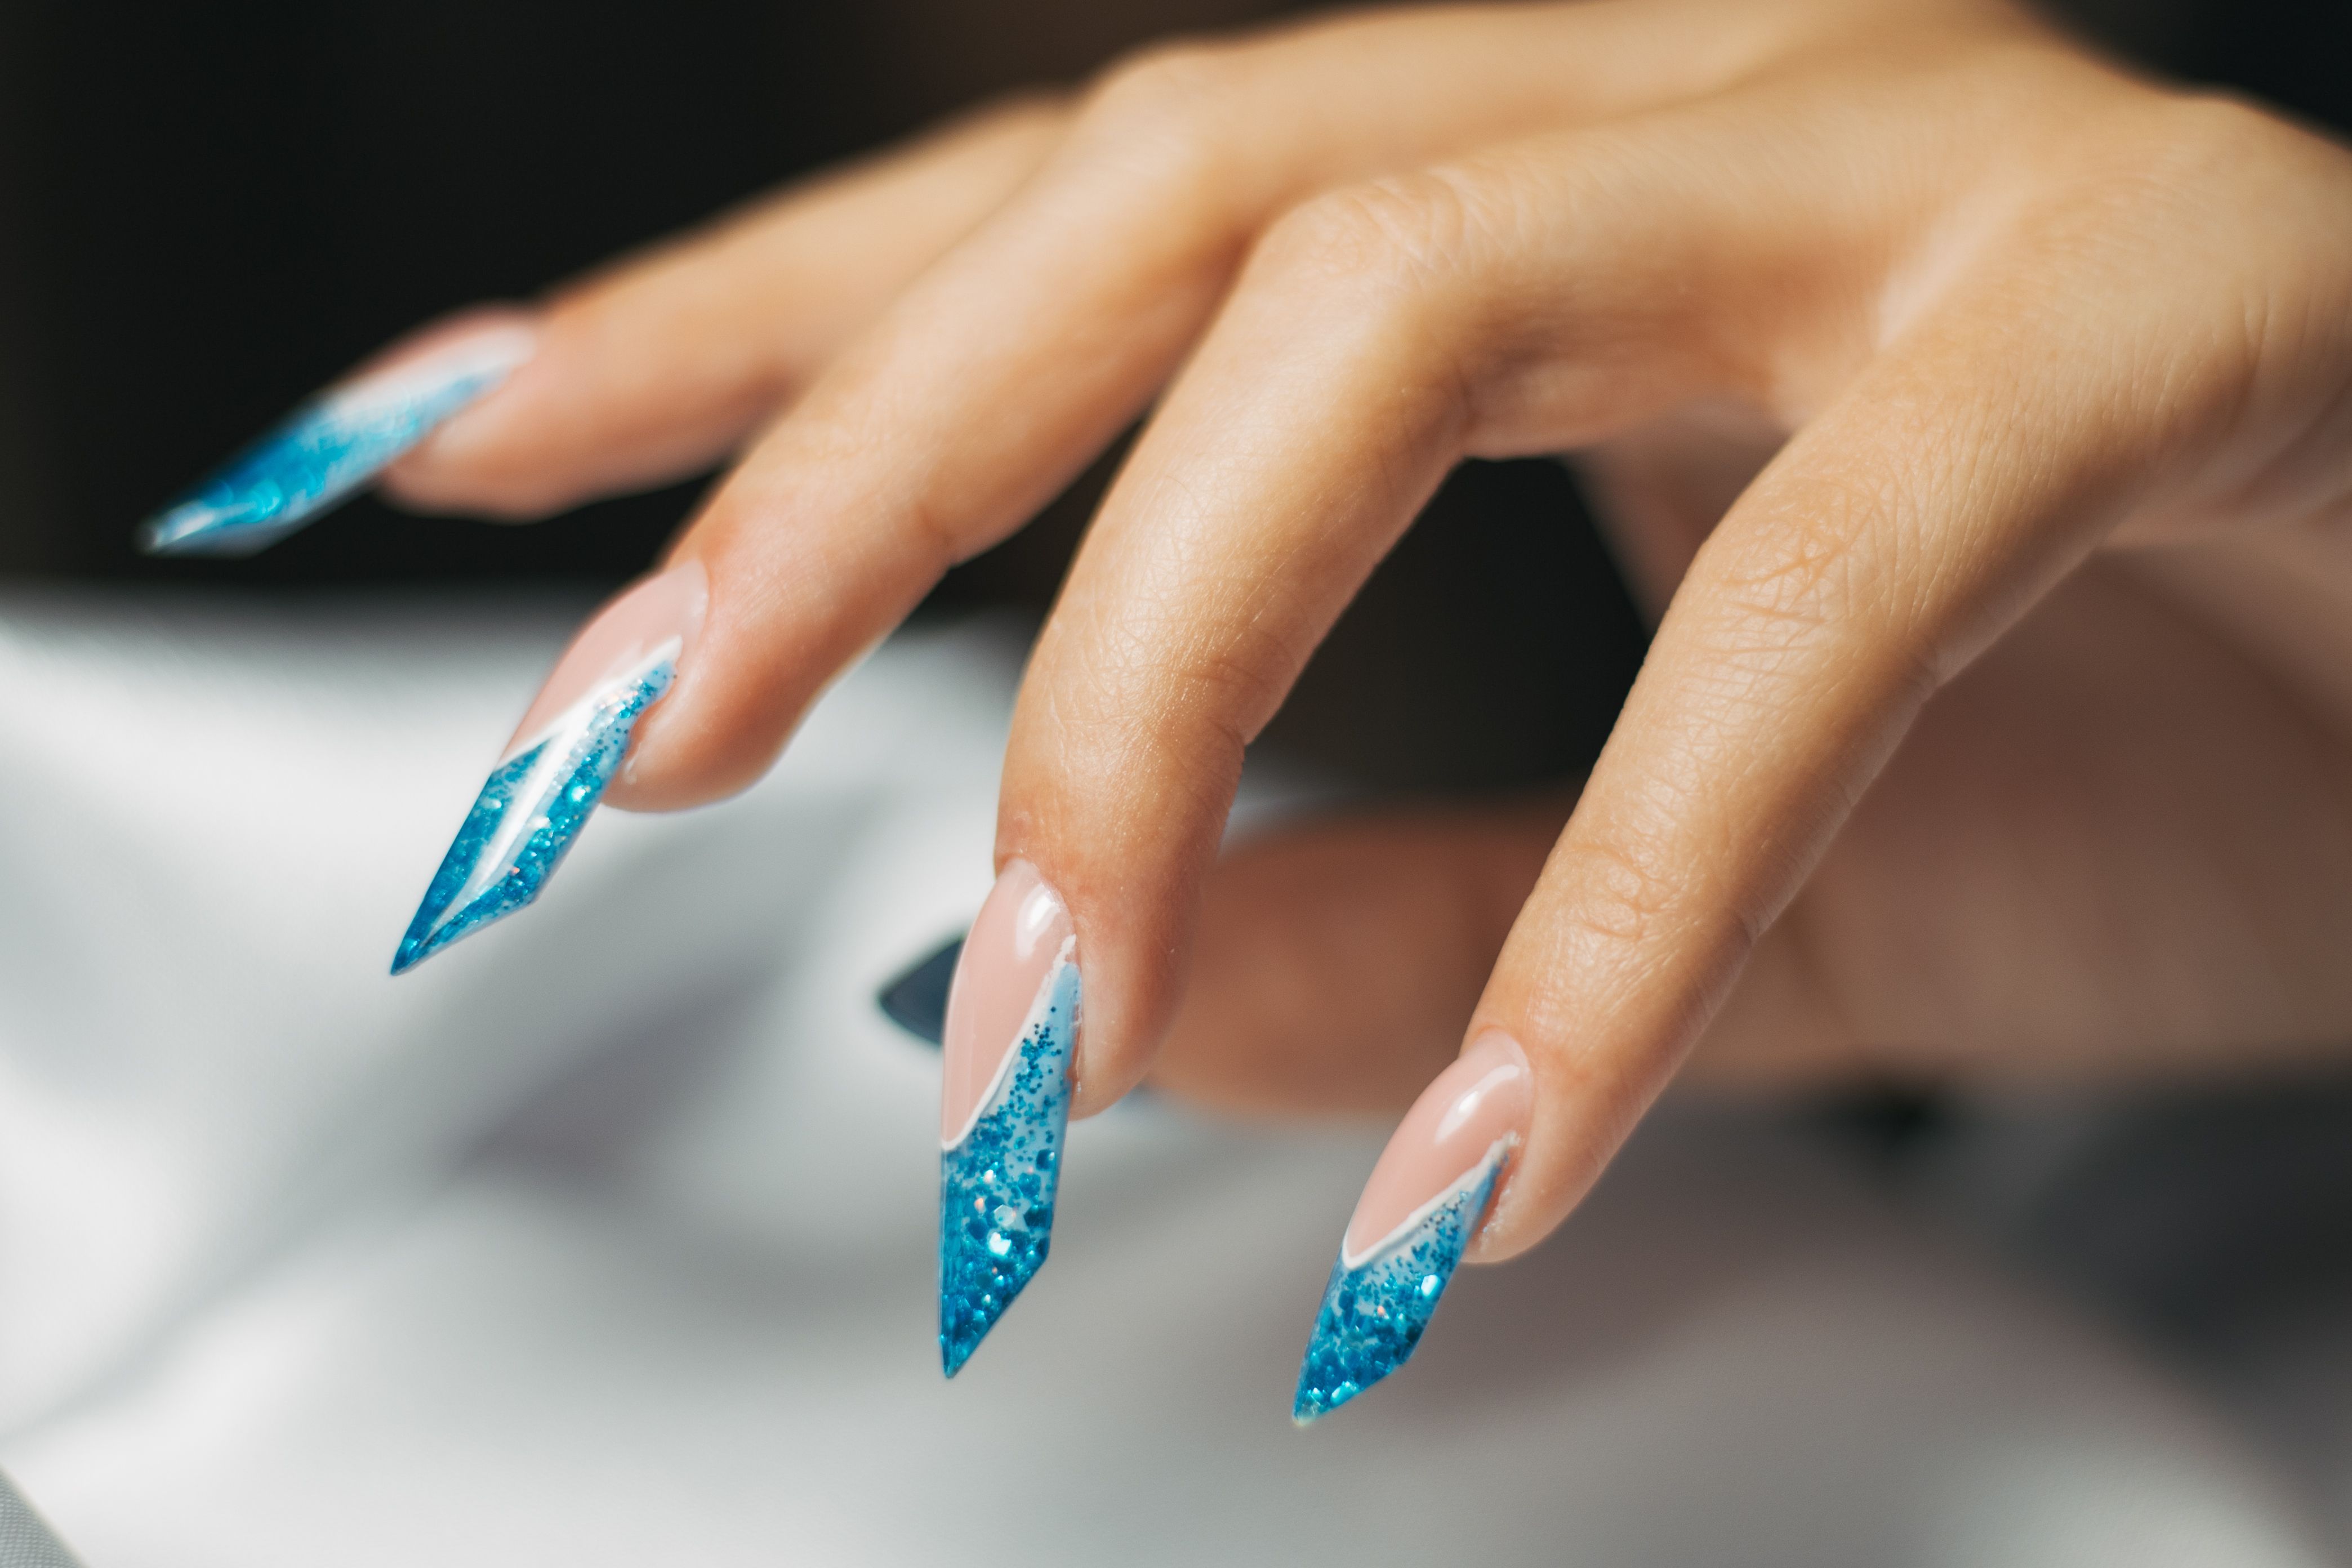 Nail Shapes 101: Shape Guide and How to File – Bio Seaweed Gel USA